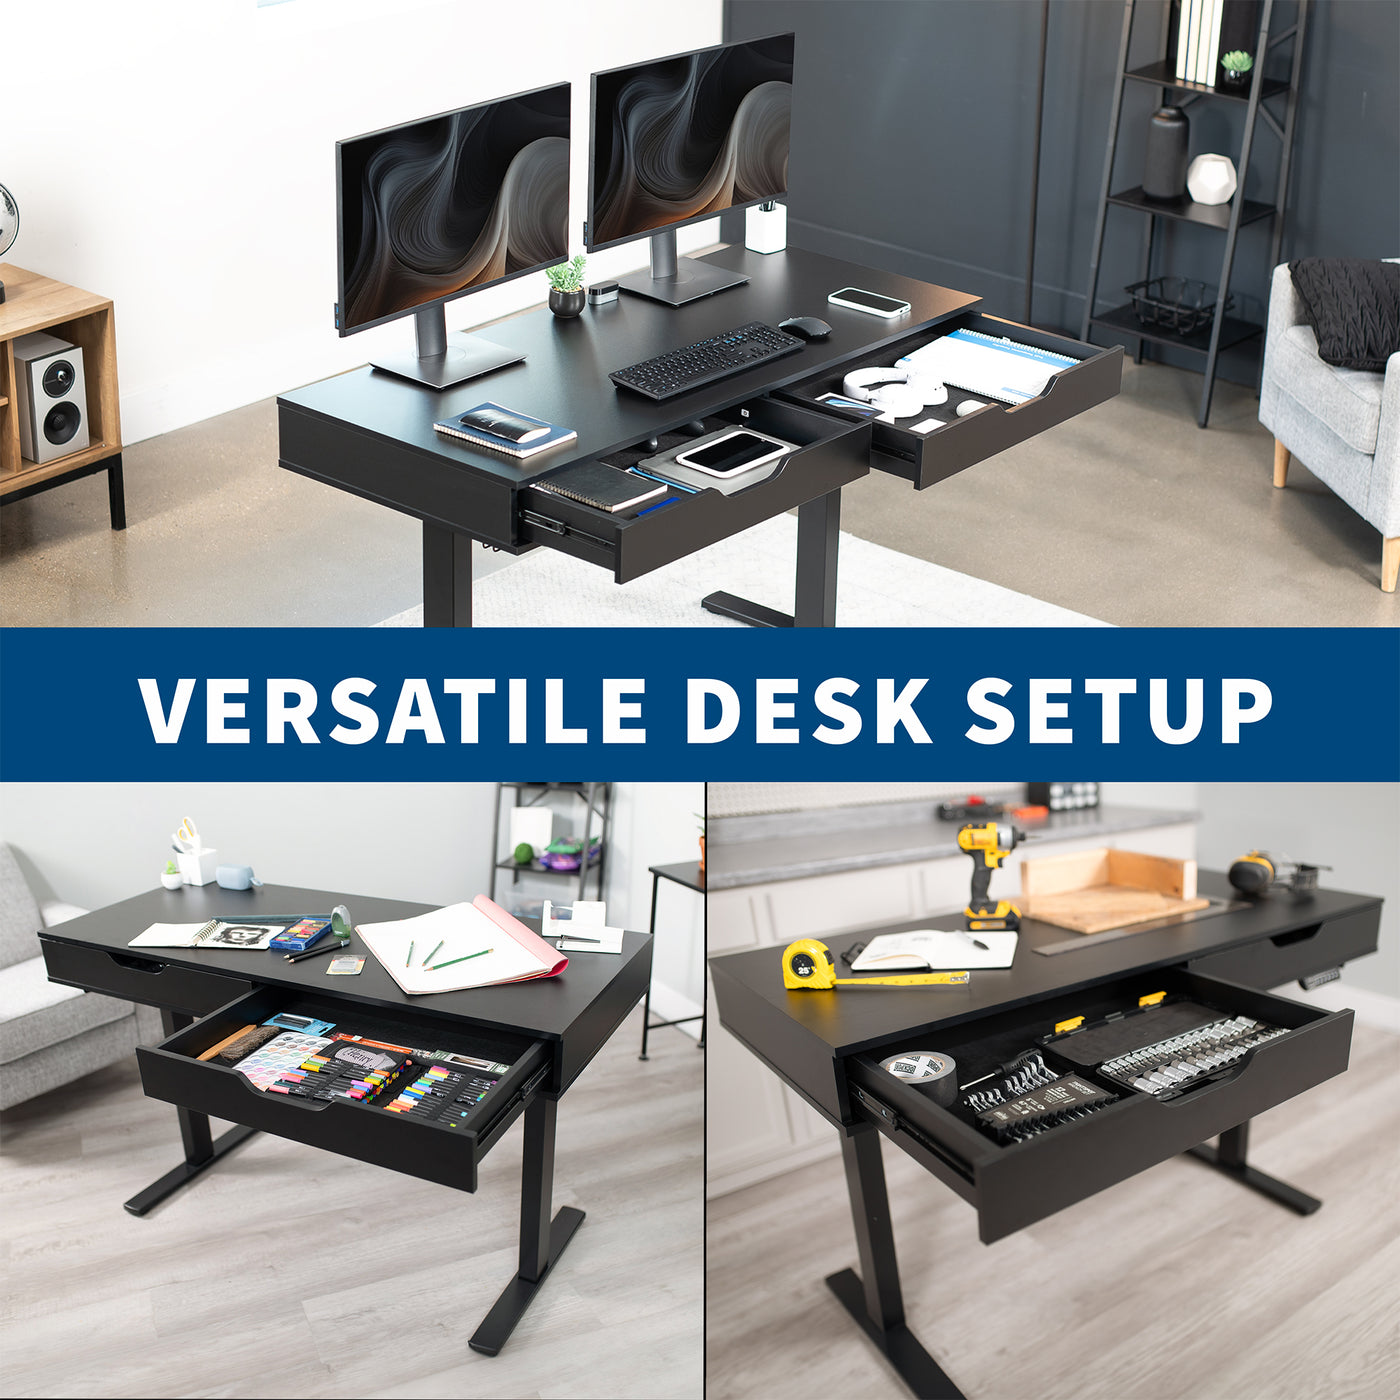 Heavy-duty electric height adjustable desk with drawers, built-in power strip, and memory controller.